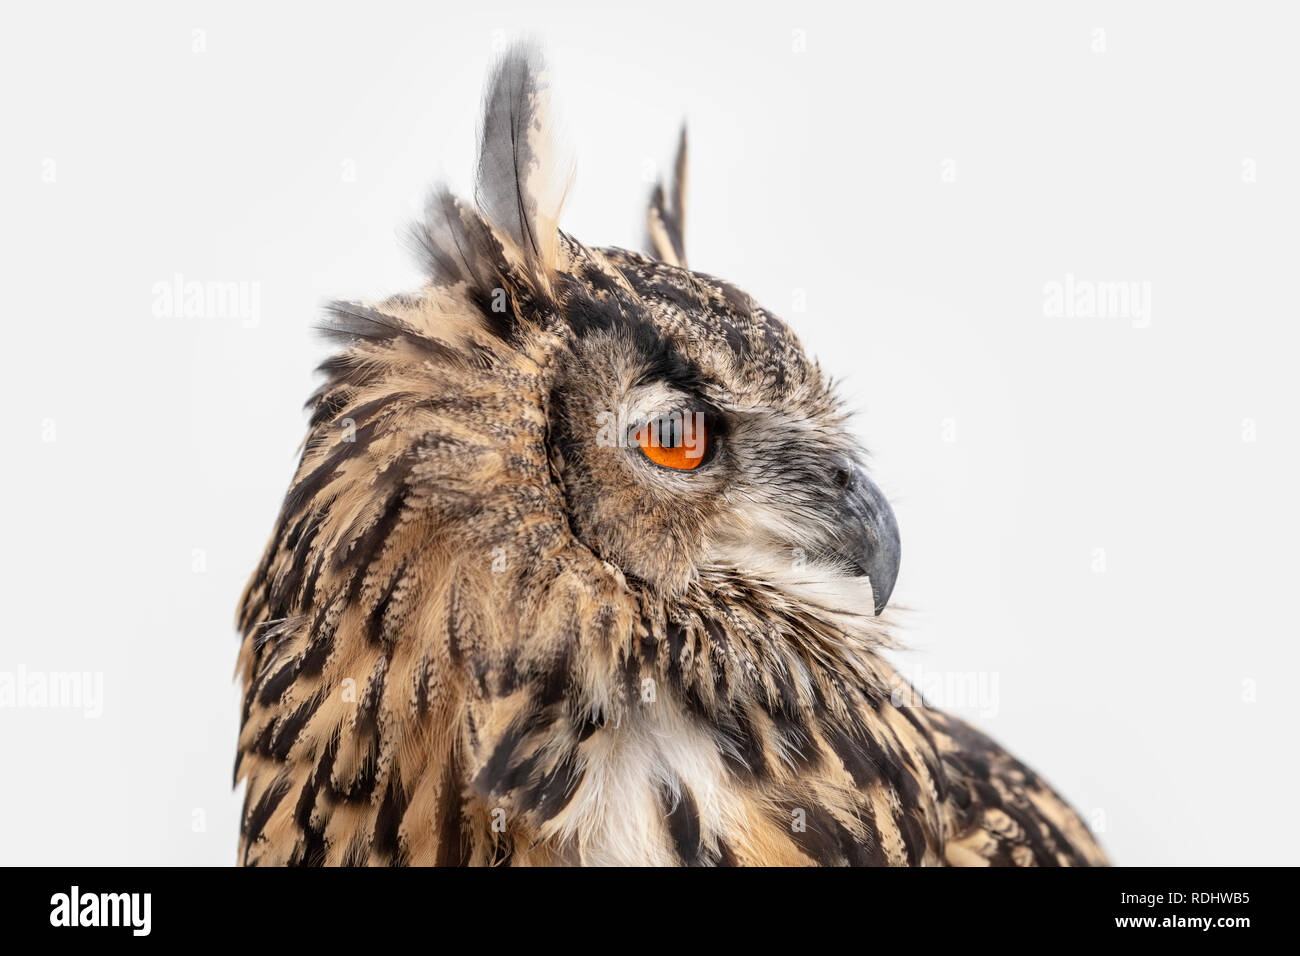 The Netherlands, Loosdrecht, Eagle-owl (Bubo bubo). Portrait. Controlled conditions. Stock Photo